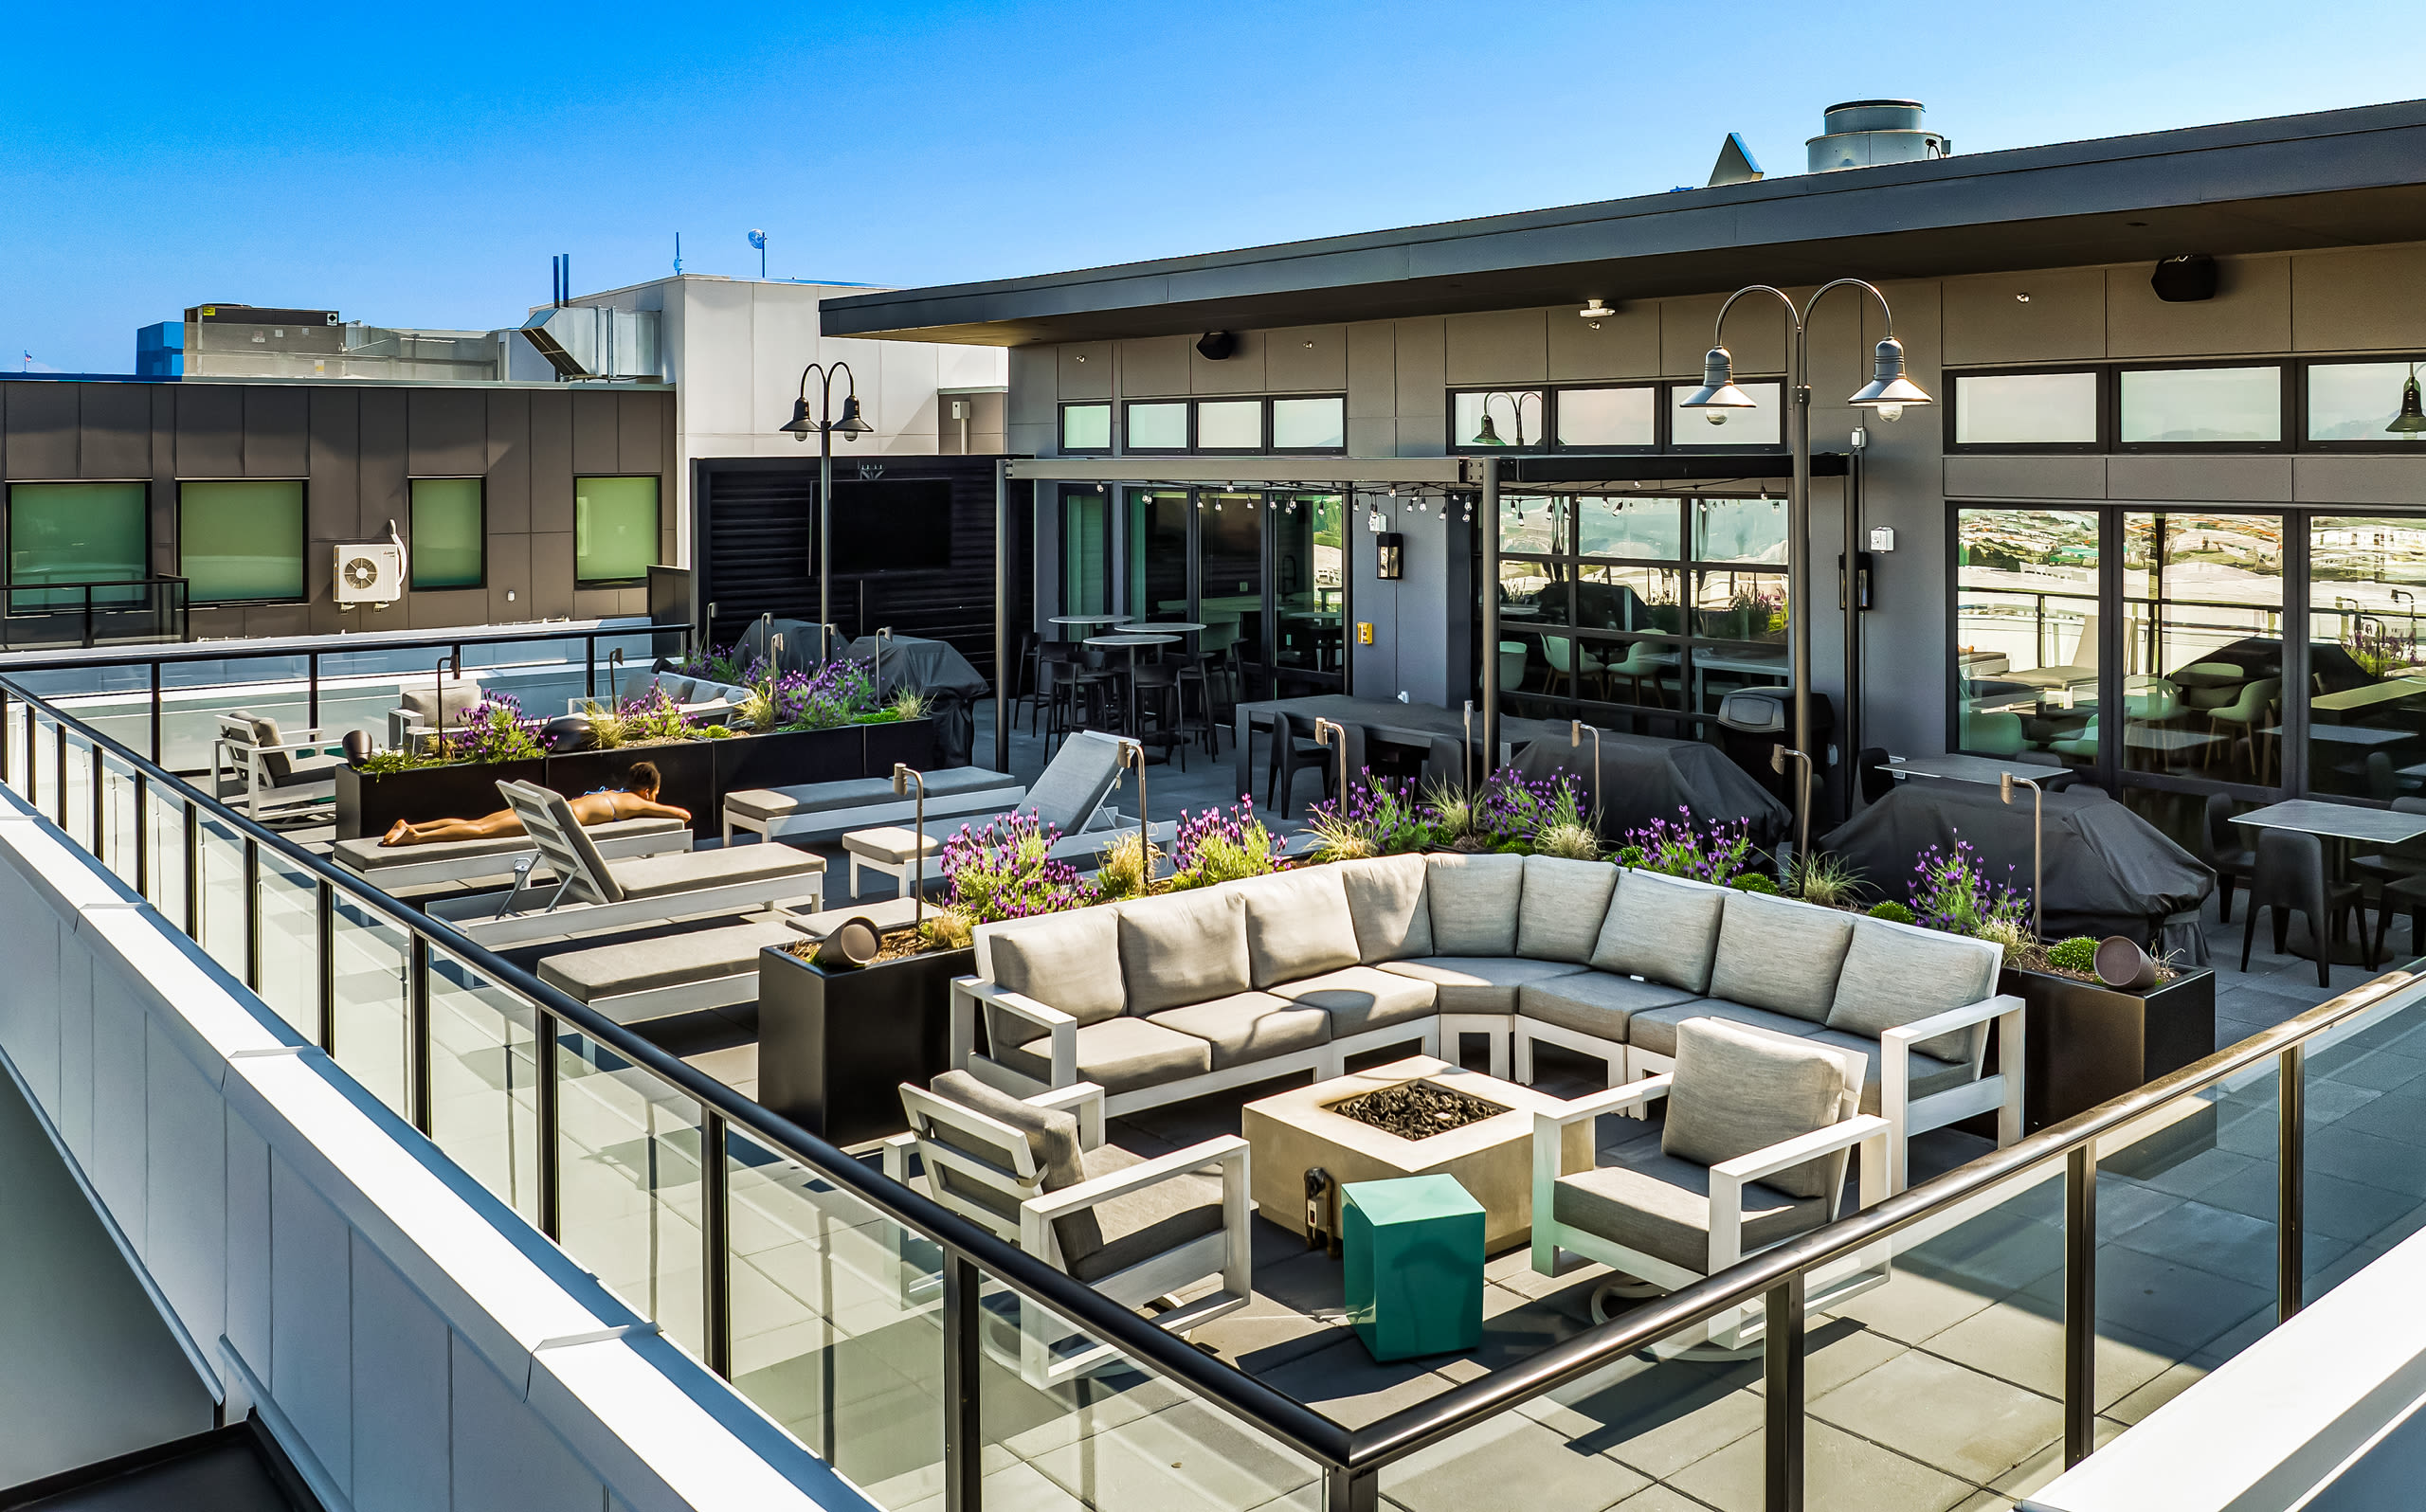 Rooftop Deck at The Lex in Tacoma, Washington.